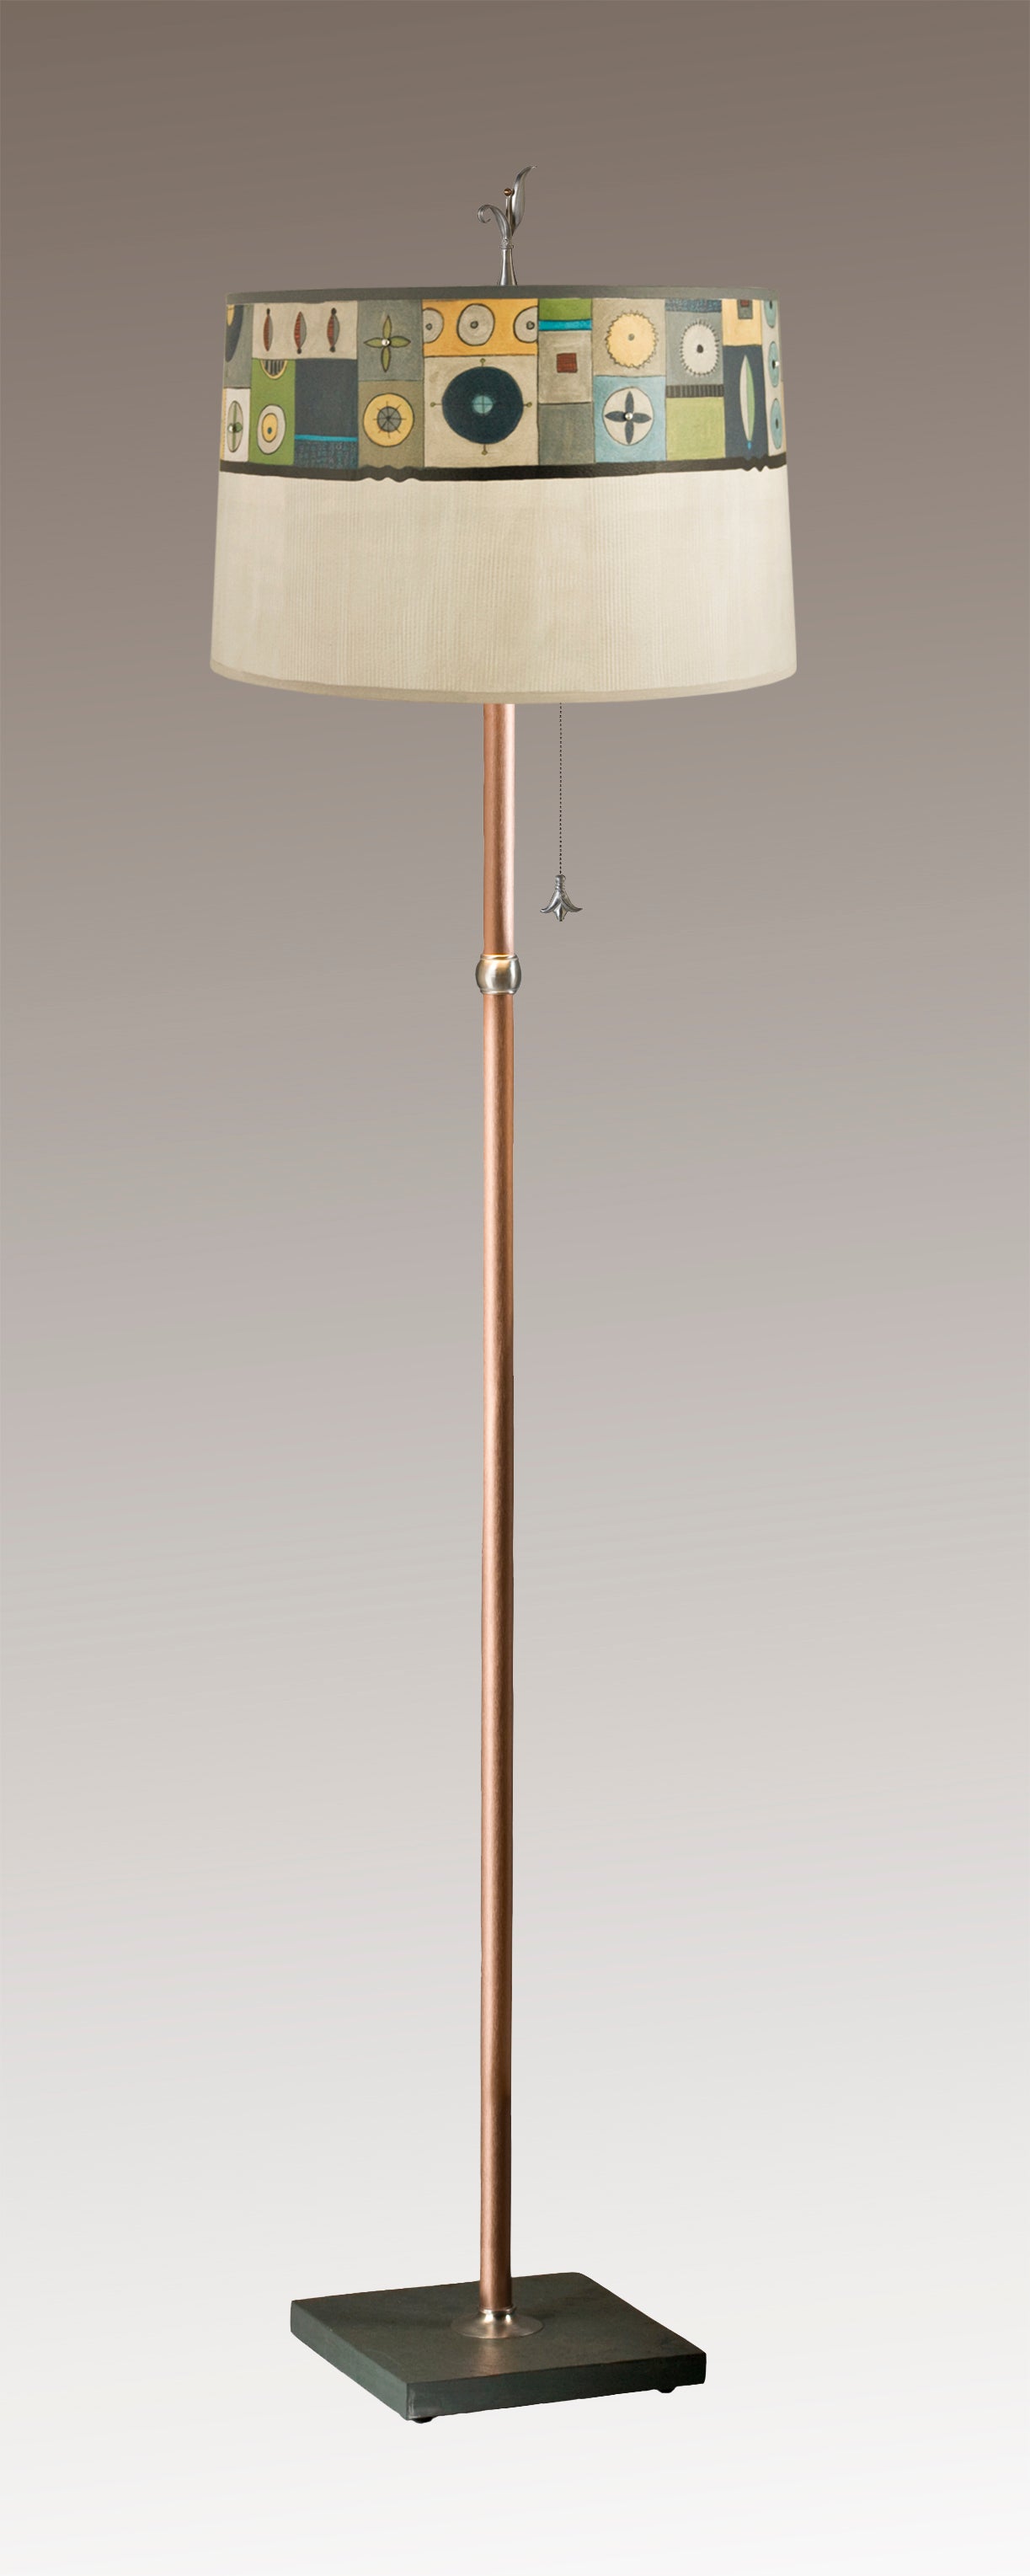 Janna Ugone & Co Floor Lamps Copper Floor Lamp with Large Drum Shade in Lucky Mosaic Oyster